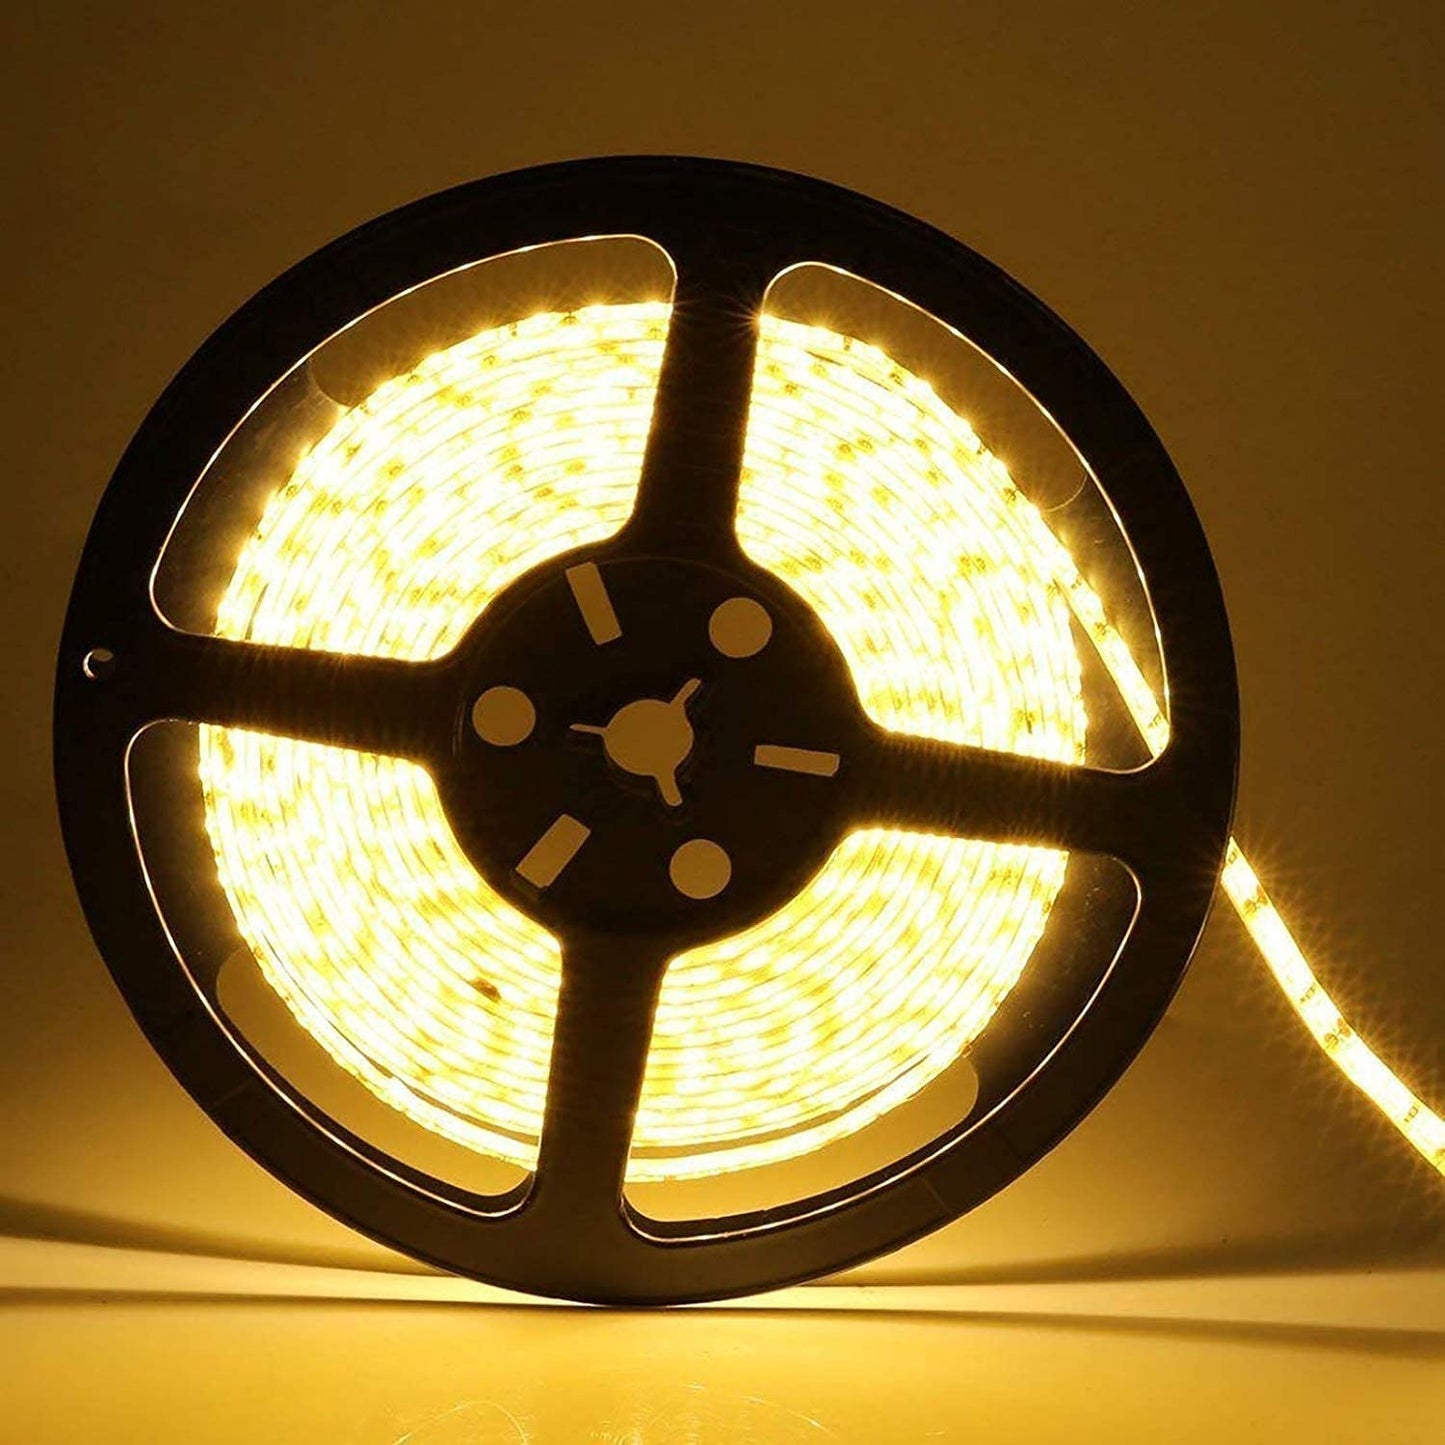 HDC- Led Strip High Lumen Light- Waterproof Light - 5 Meter | 240 LED Per Meter | Driver/Adapter Included (Warm White) - HDC.IN